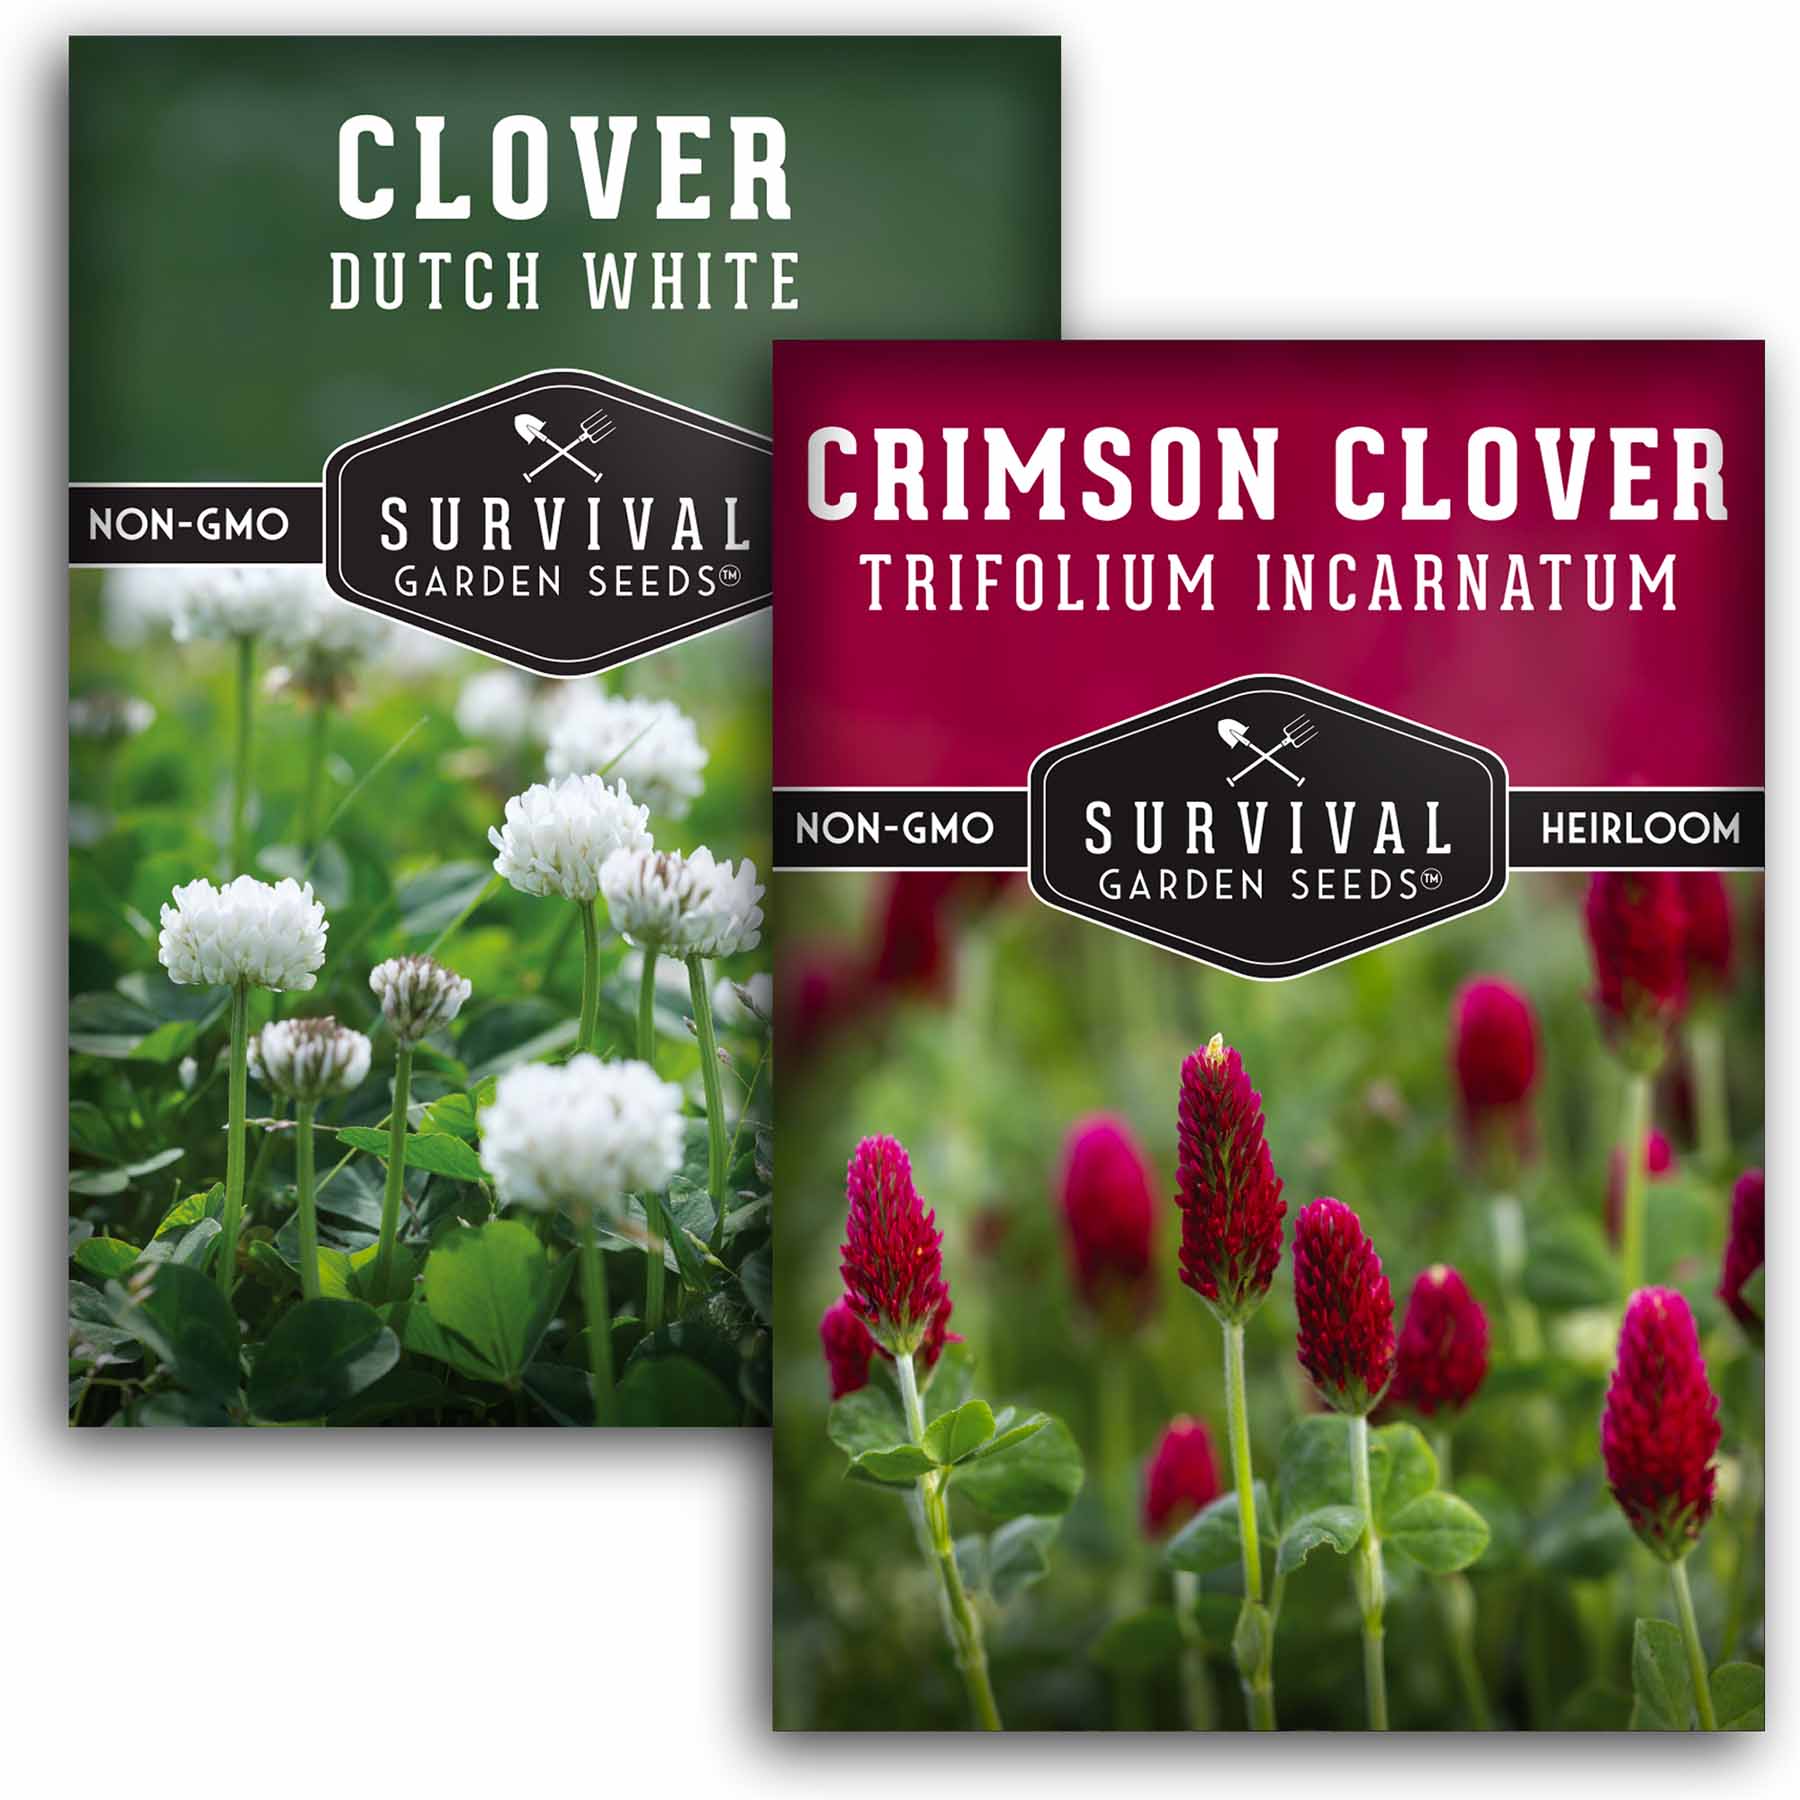 Clover collection - 2 packets of clover seeds